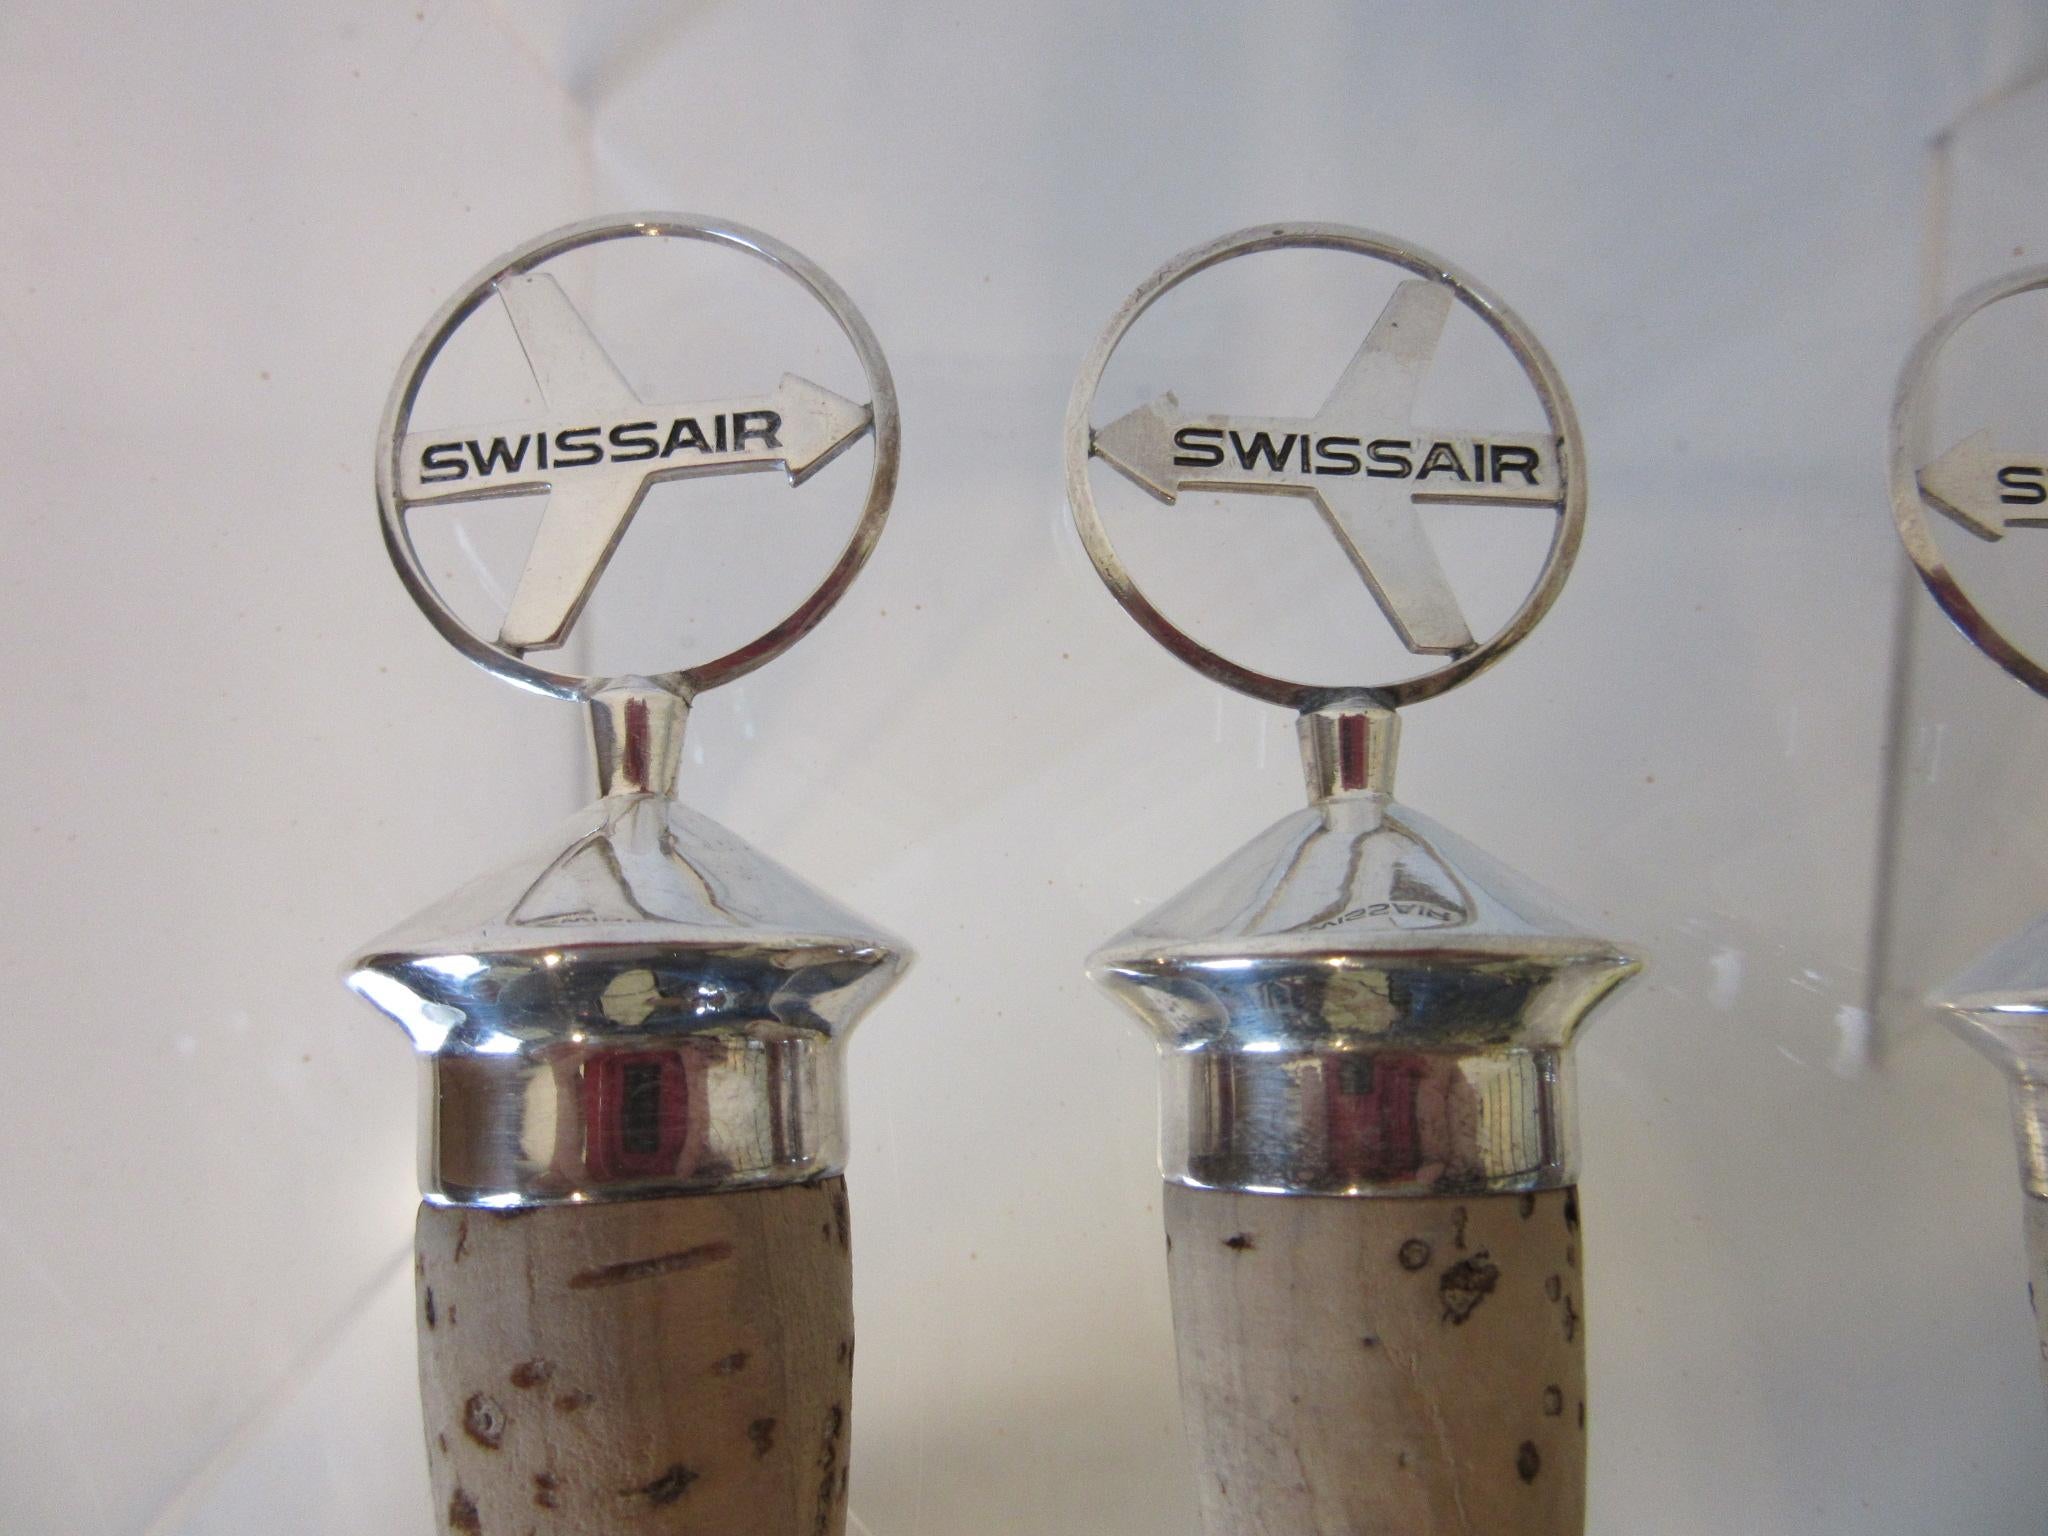 A set of four Swiss Air airlines logo wine / bottle stoppers with a jet plane form and Swiss Air in black on both sides having a silver cast topper and cork bottom. From the 1970s and in original vintage condition the perfect way to class up the bar